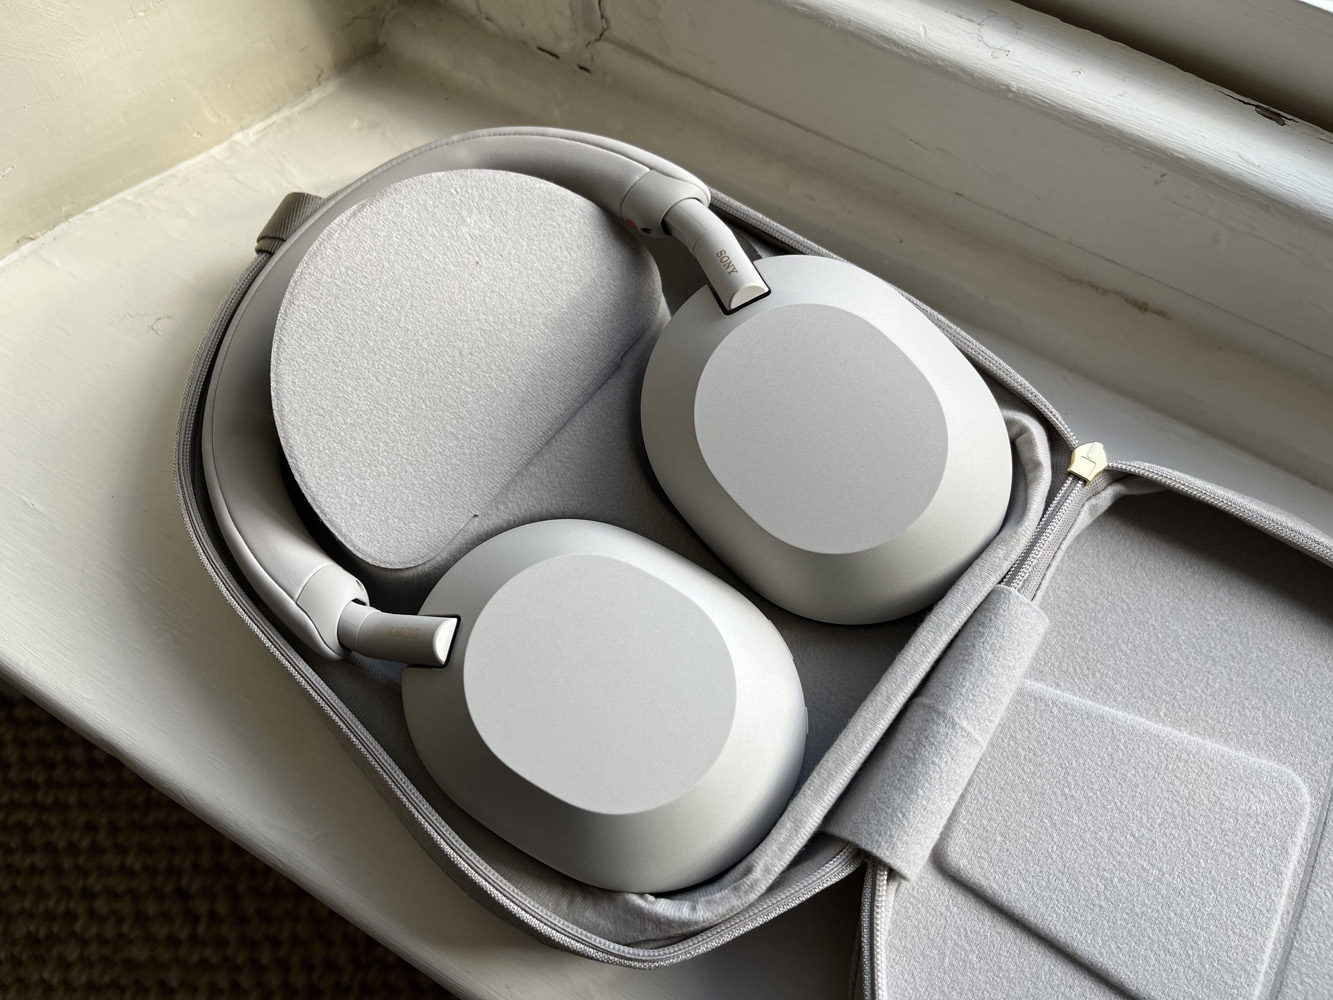 Sony rewrites the rules with its WH-1000XM5 headphones